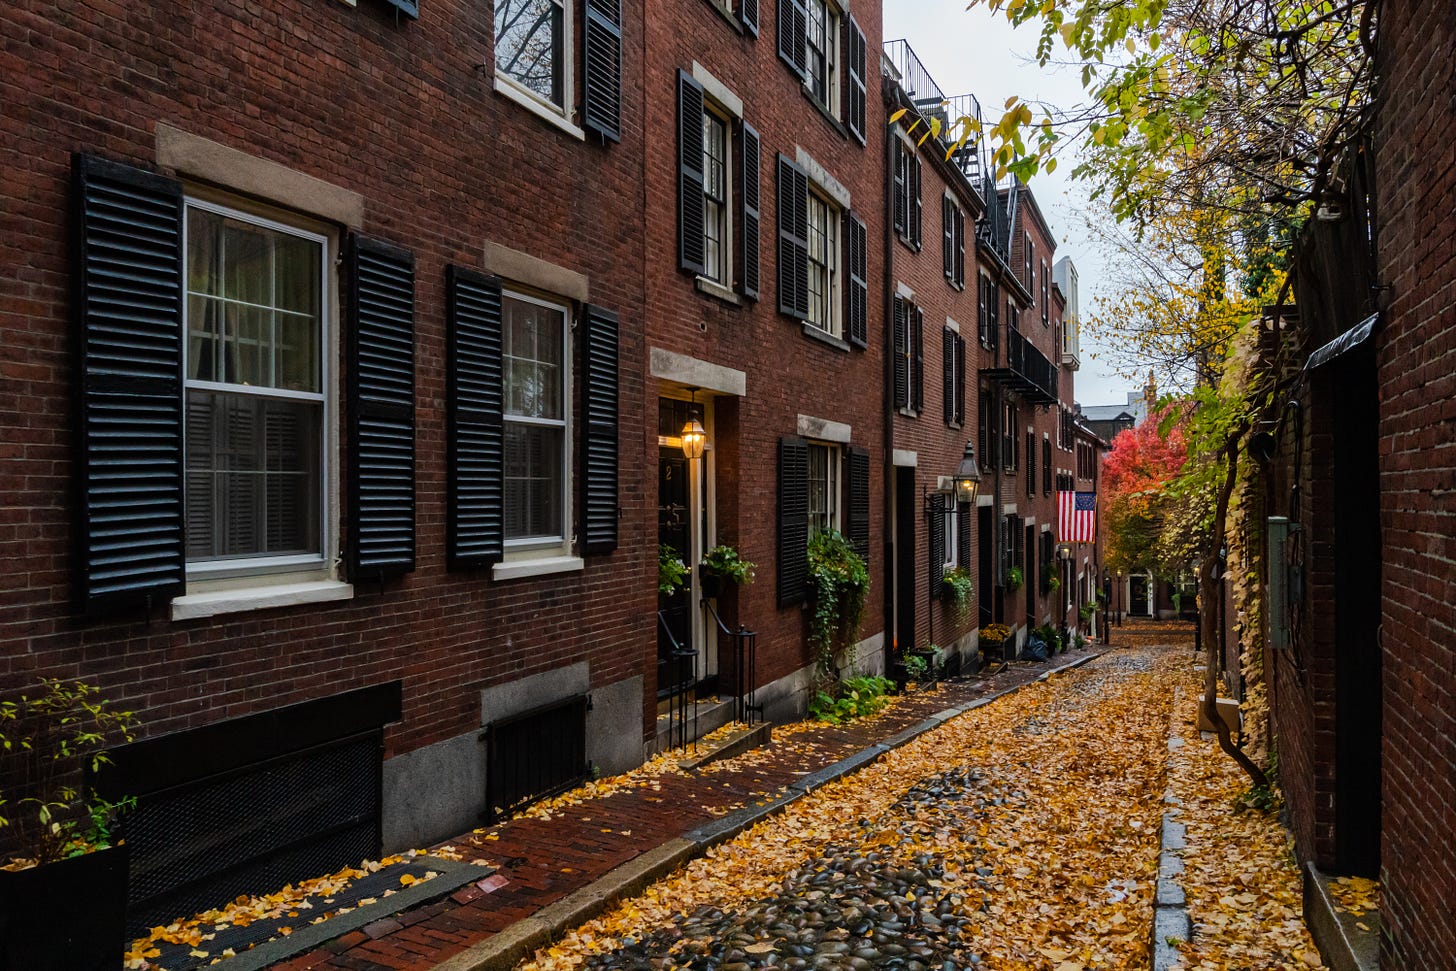 A cobblestone side street in Boston covered in yellow leaves. On each side are brick rowhouses.